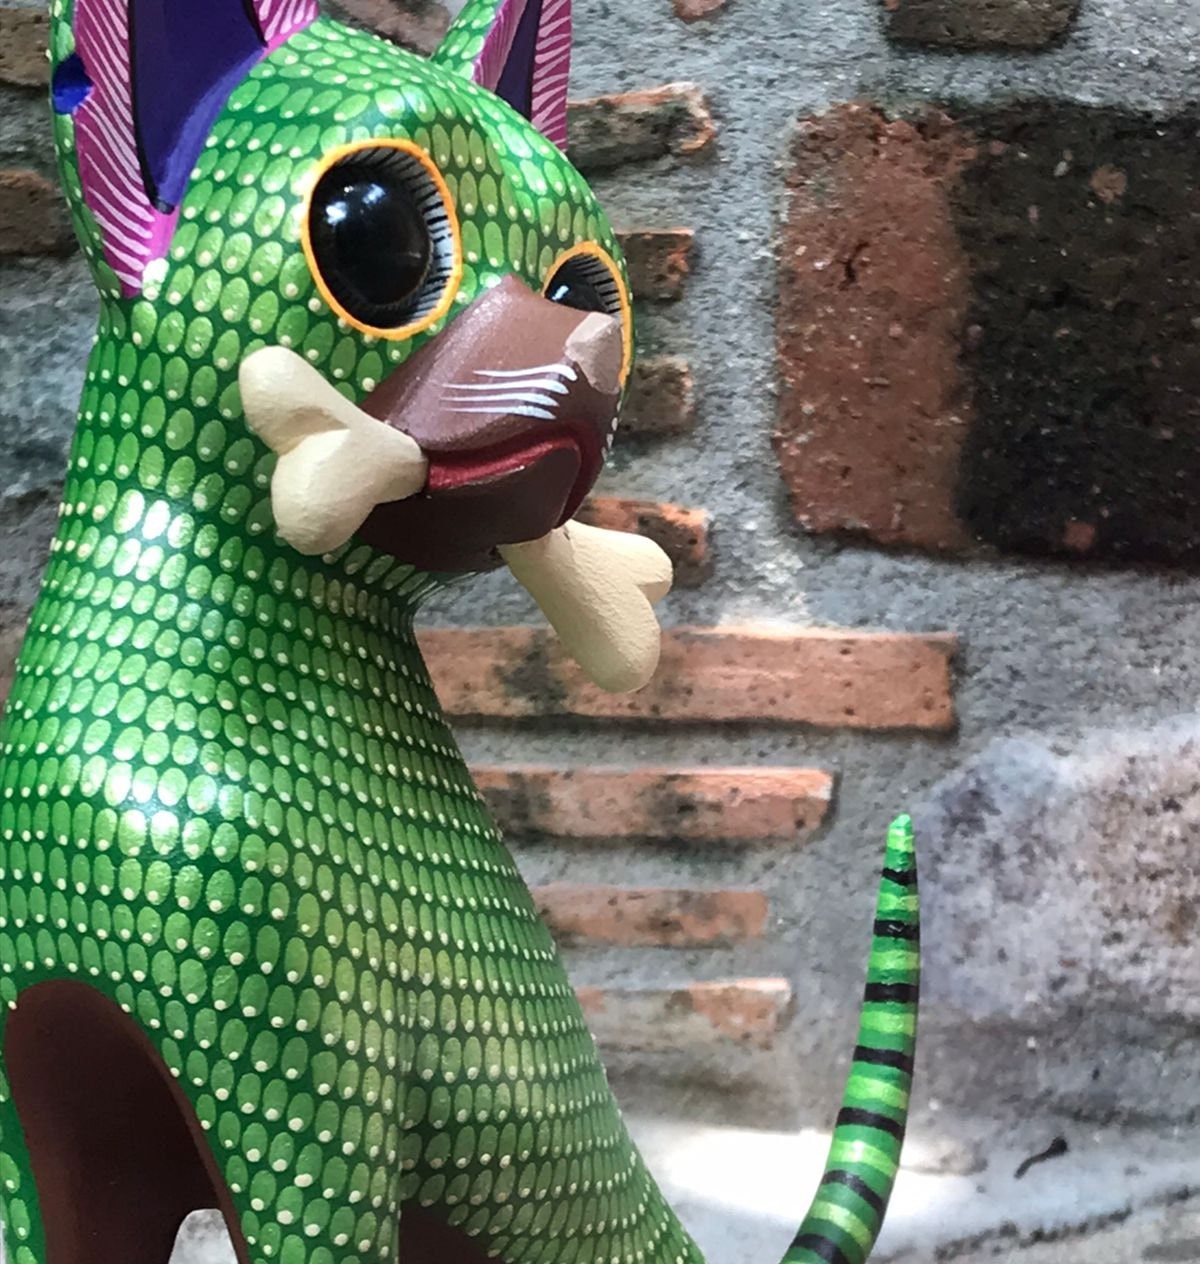 Great Mexican Oaxacan Wood Carving Alebrije Chihuahua By Isaac Fabian PP4538